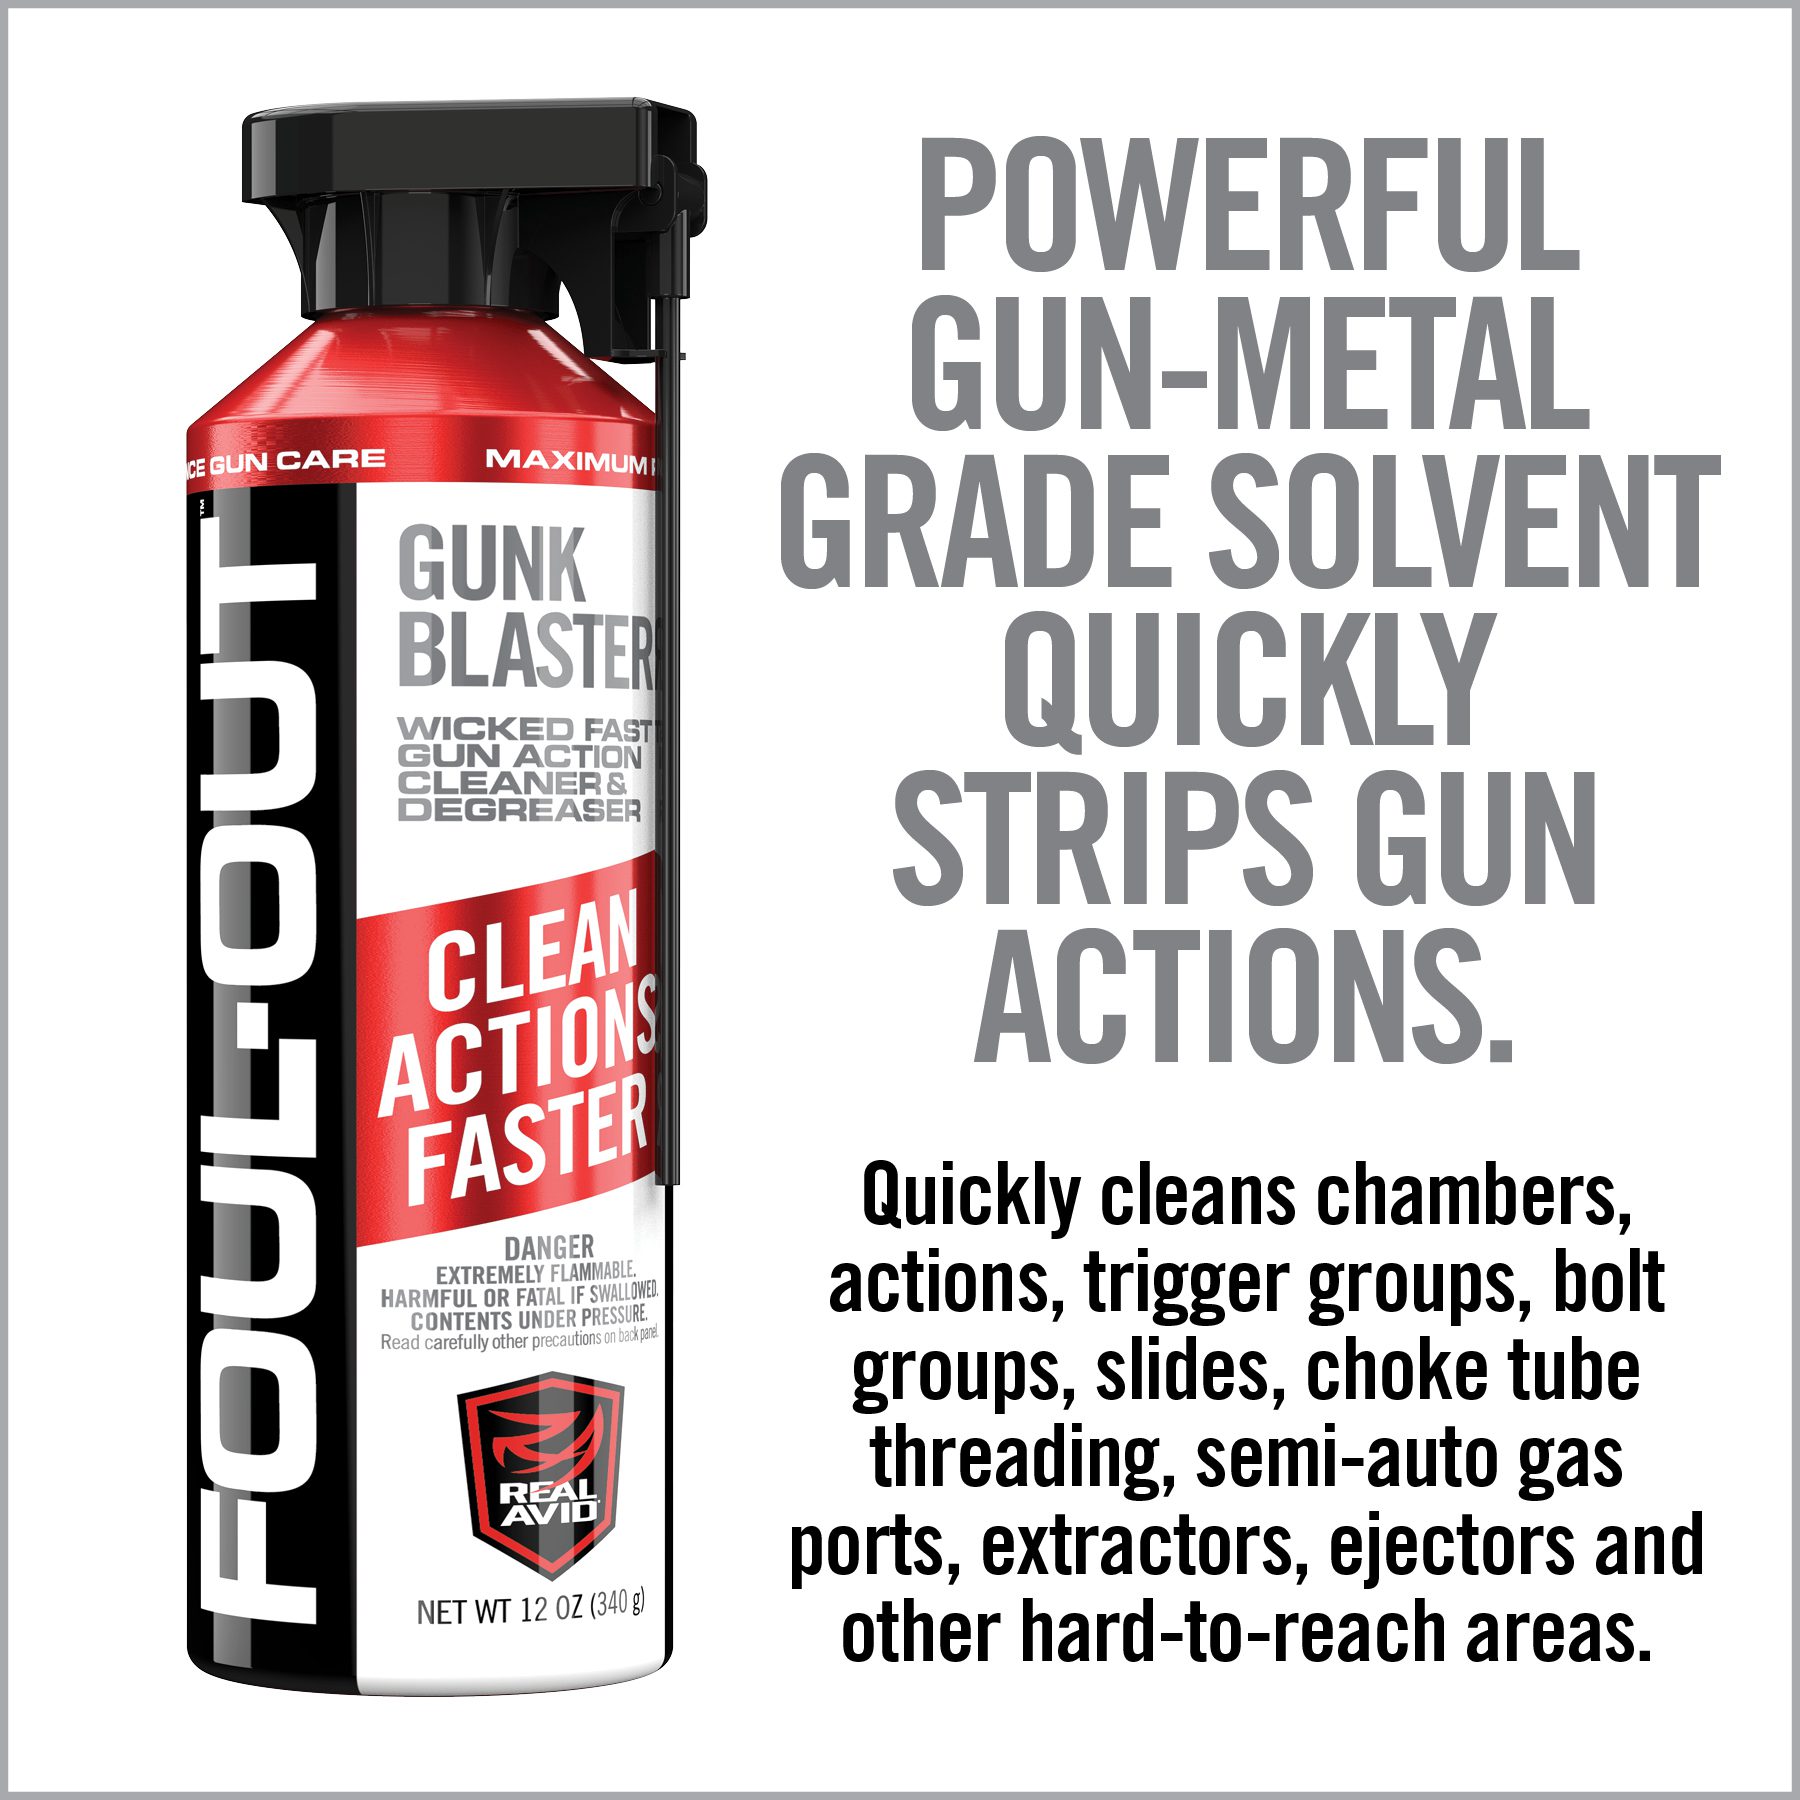 a bottle of gun - metal grade solution with instructions